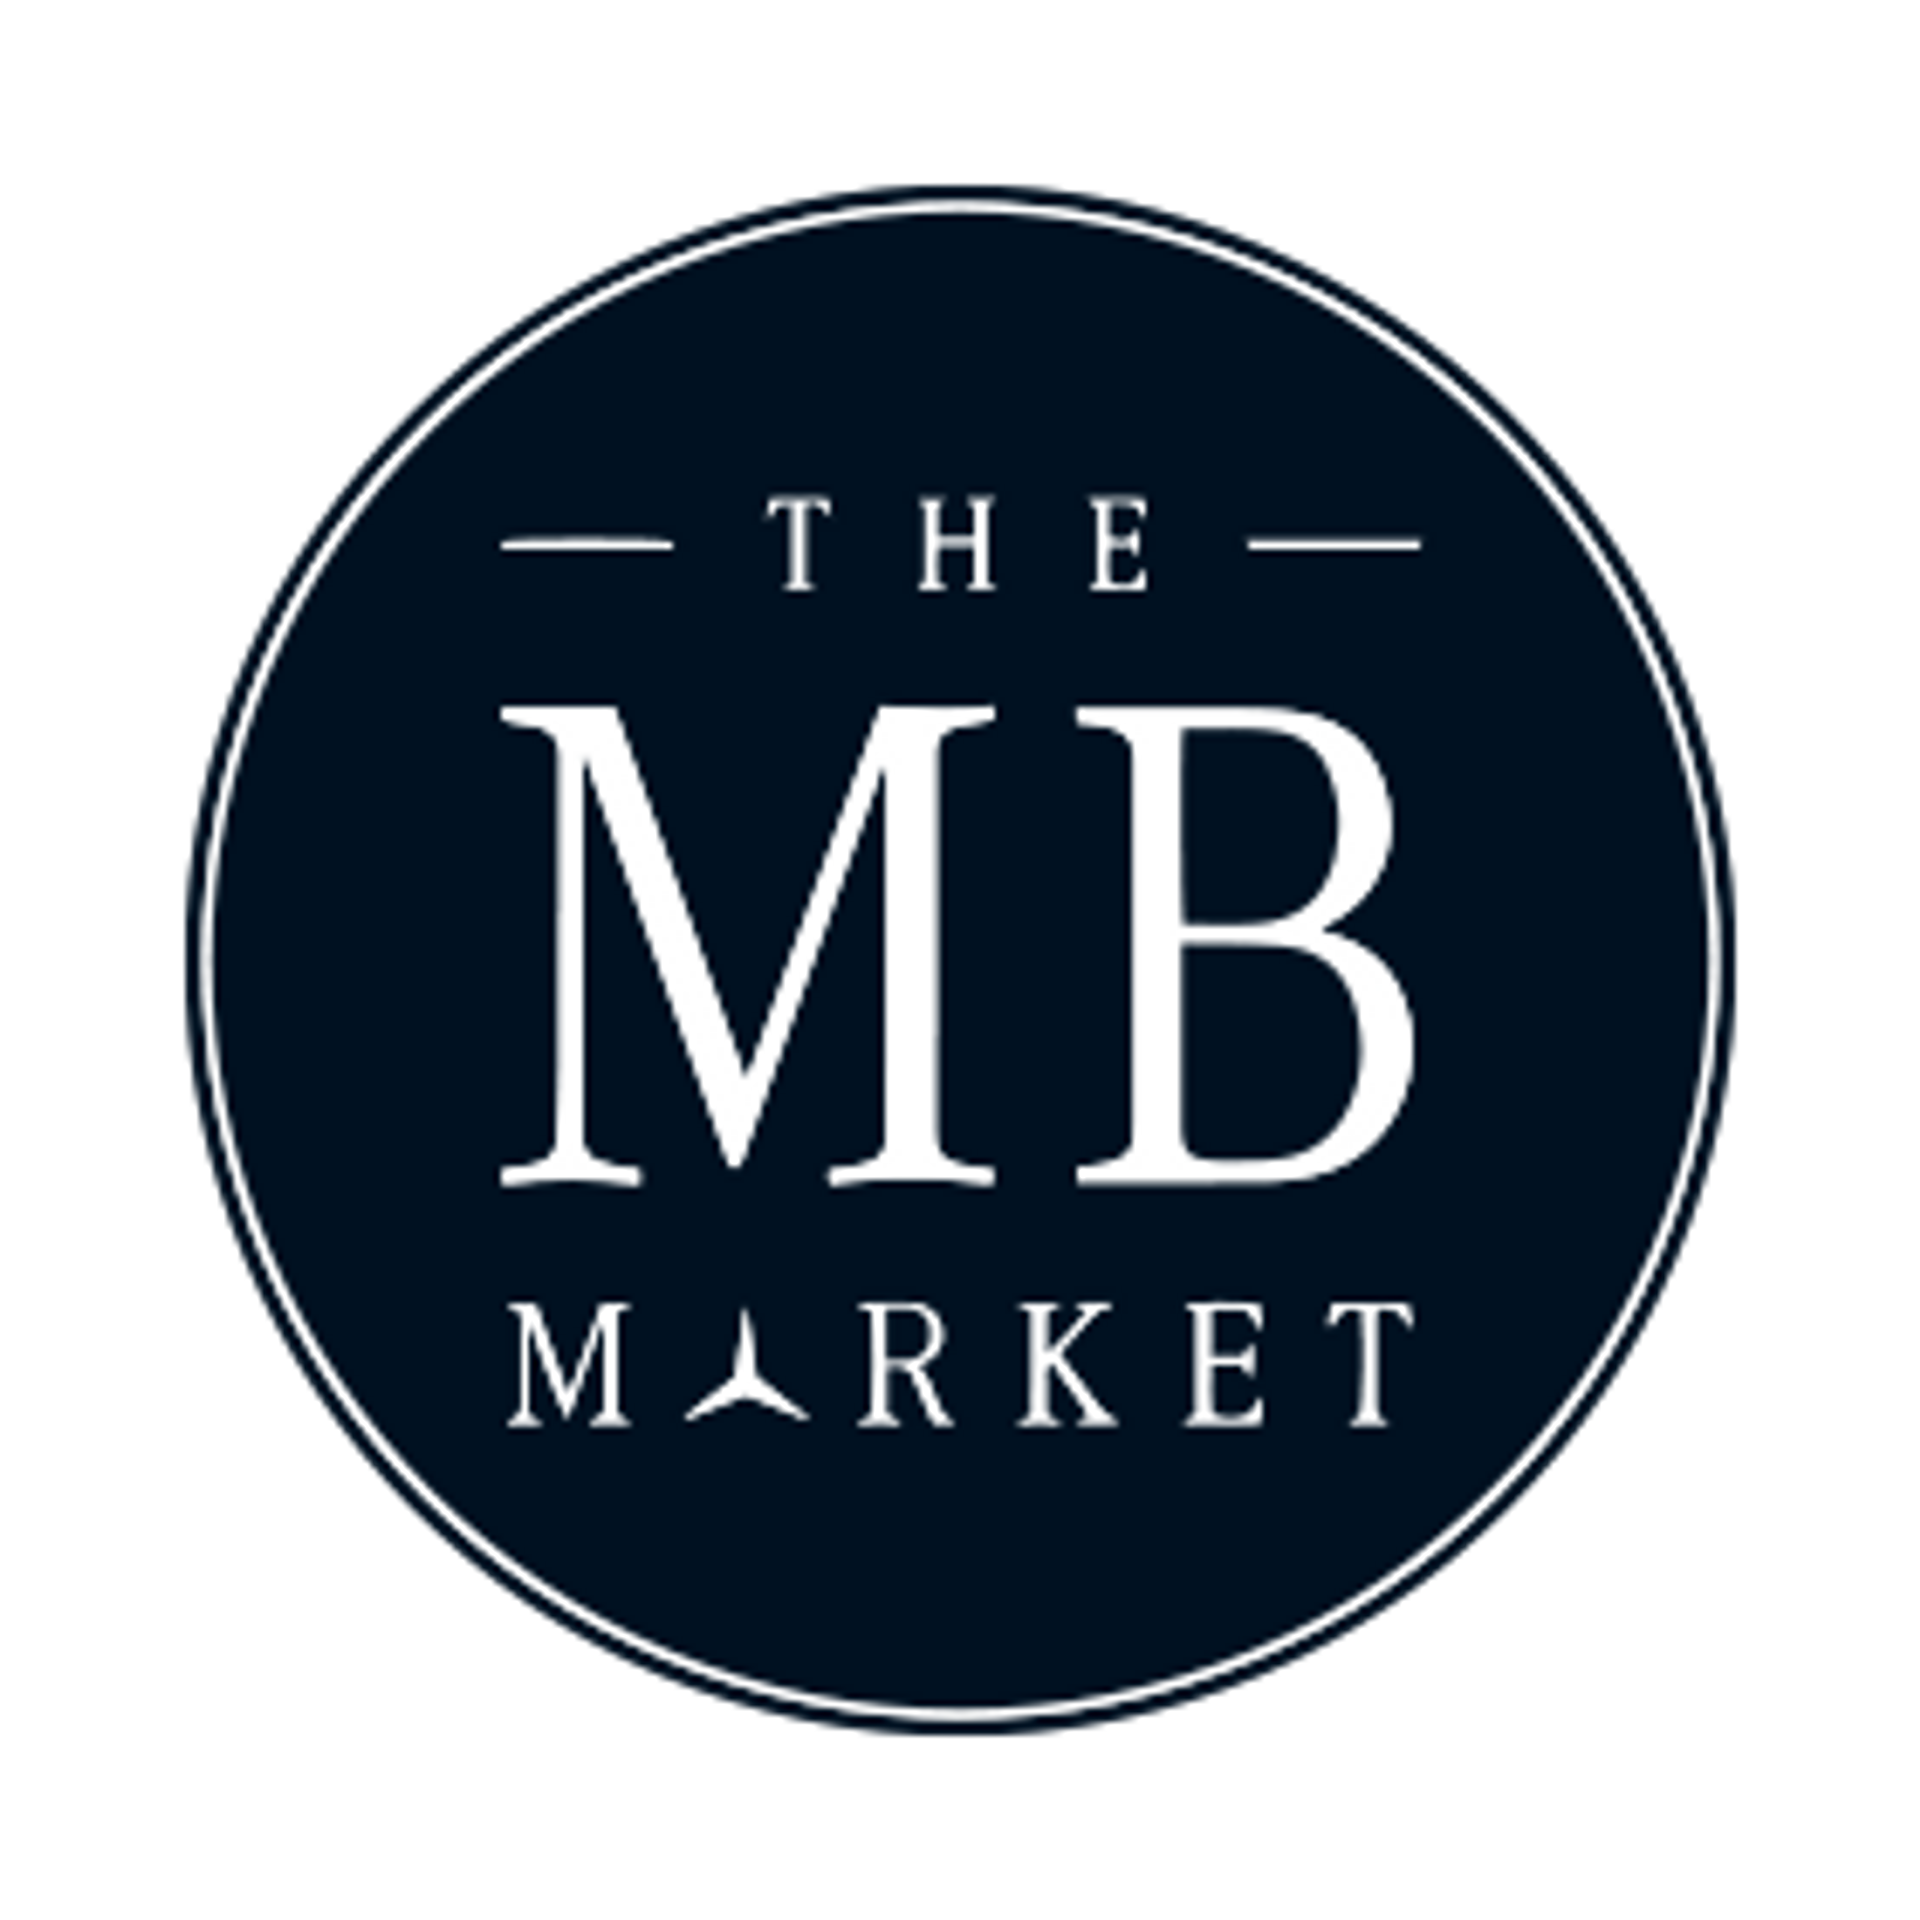 The MB Market